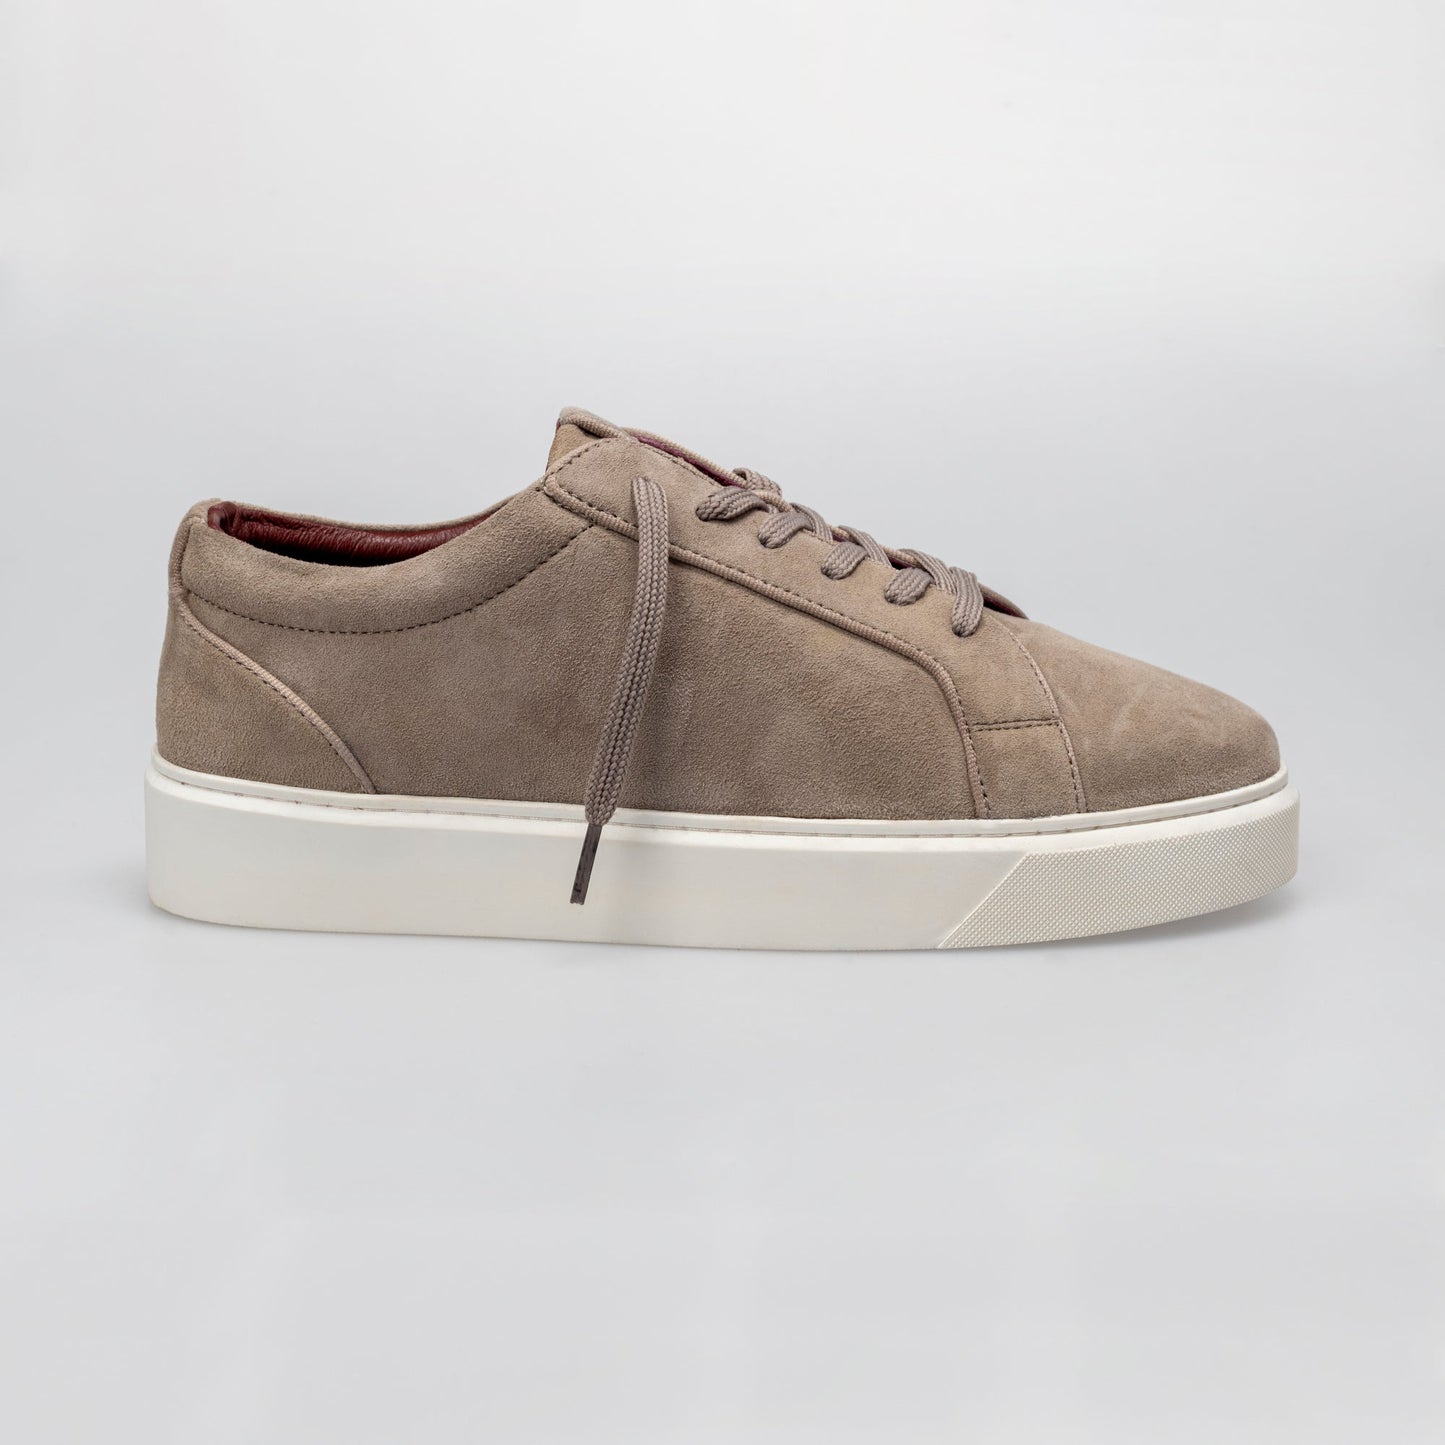 Stone Suede Trainers - Trainers - 8 - THREADPEPPER